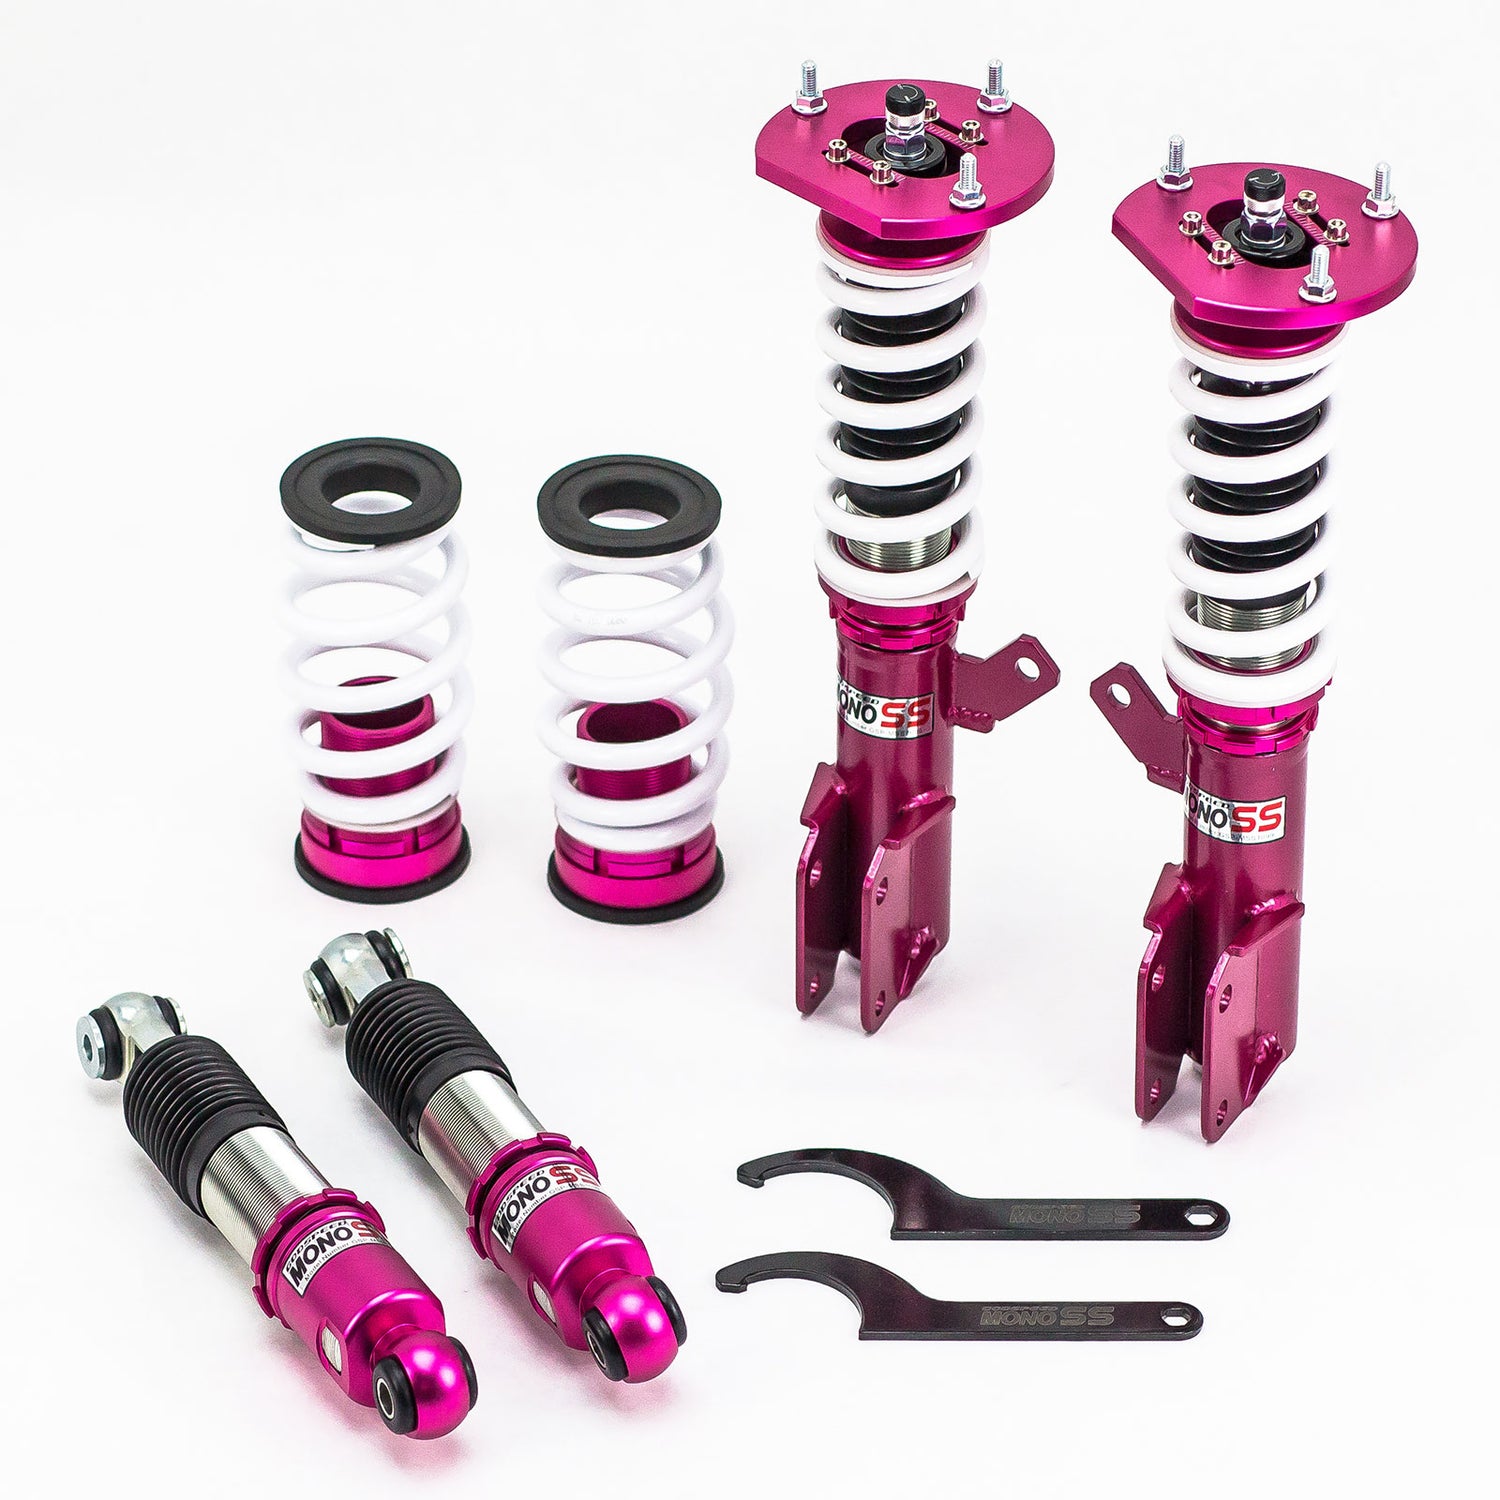 Godspeed MSS1099-C MonoSS Coilover Lowering Kit, Fully Adjustable, Ride Height, Spring Tension And 16 Click Damping, Chevrolet HHR 2006-11